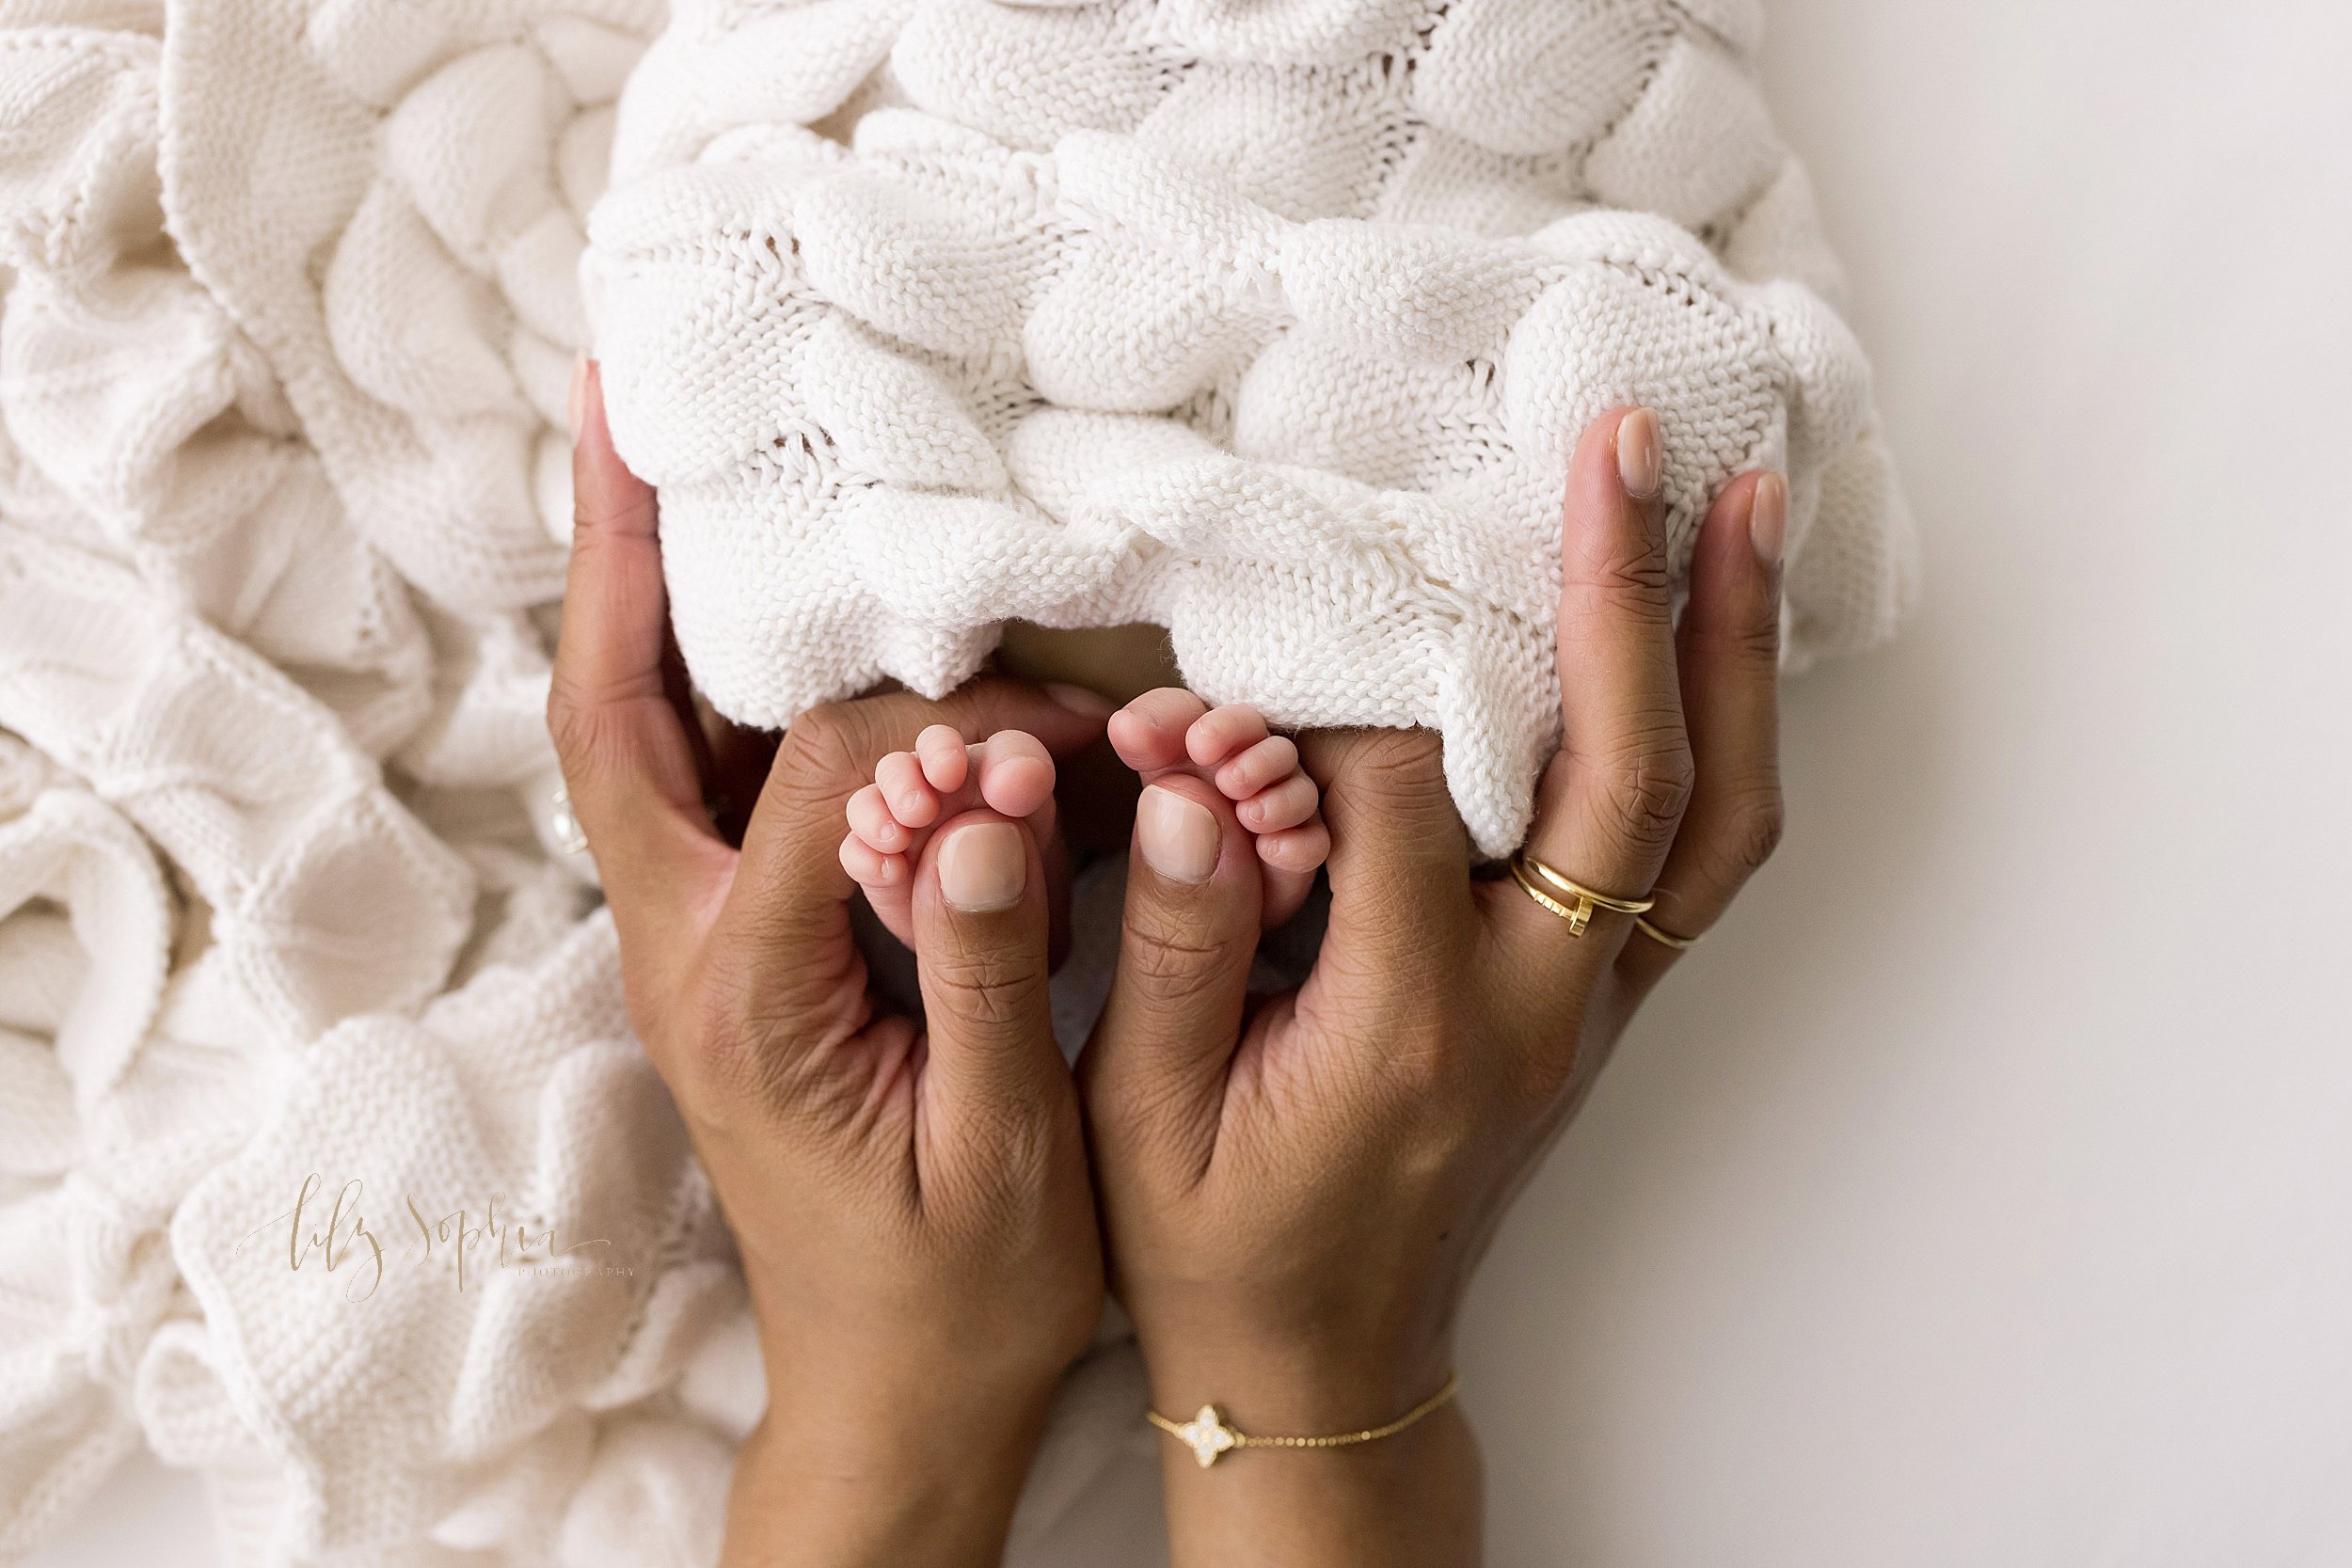  Newborn photo session of an African-American infant girl with her tiny feet peeking out from under a soft white crocheted blanket being held by her mother taken in a natural light studio near Morningside in Atlanta. 